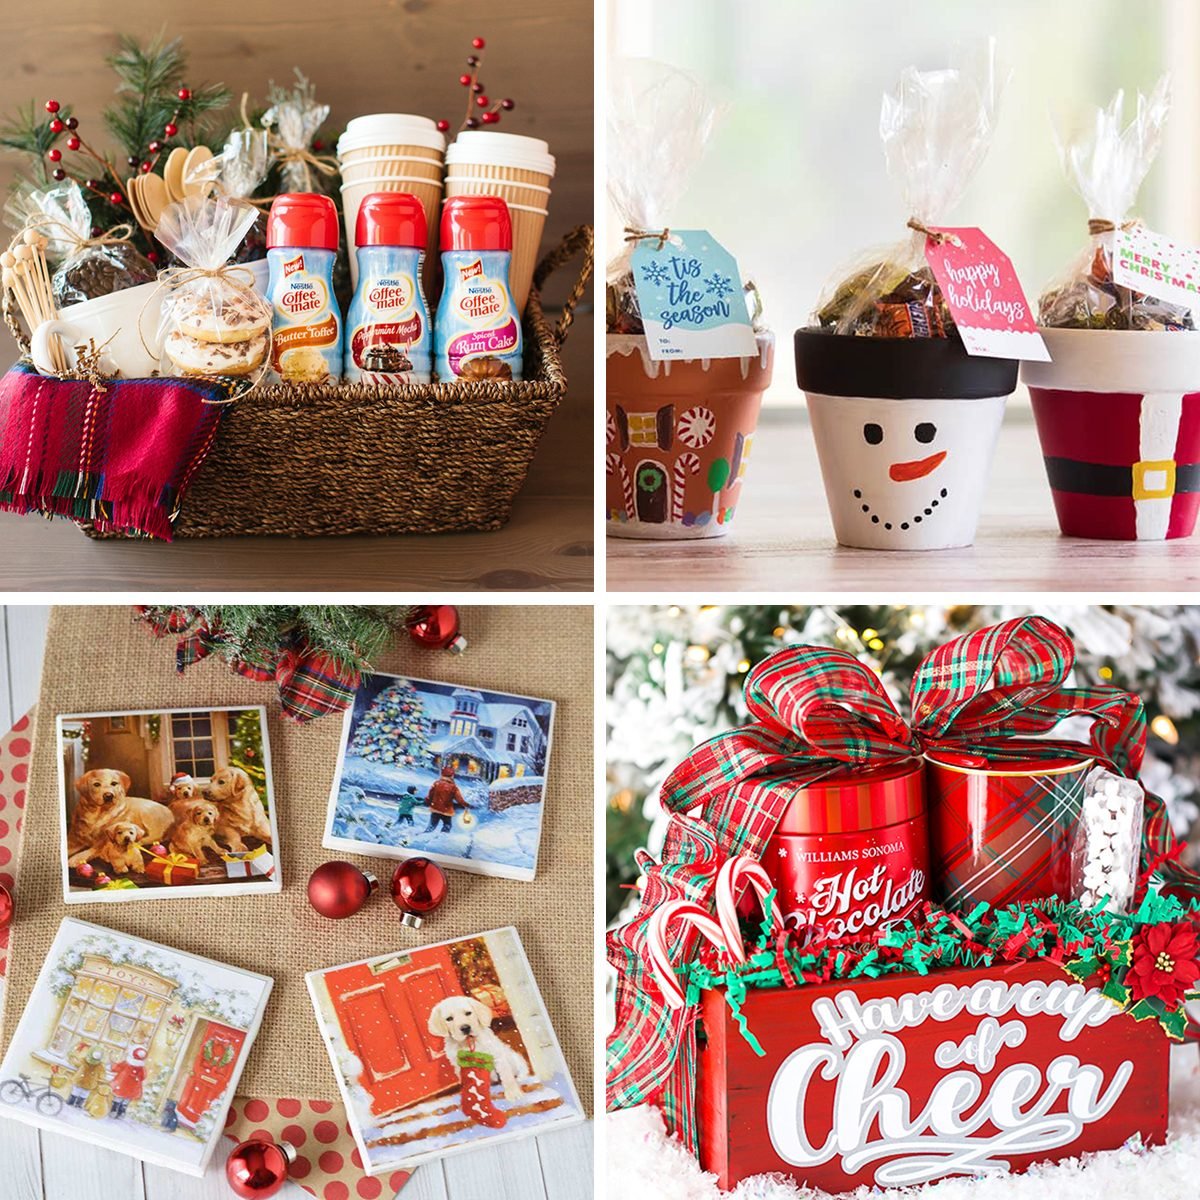 https://www.rd.com/wp-content/uploads/2017/12/diy-christmas-gifts-collage_FT.jpg